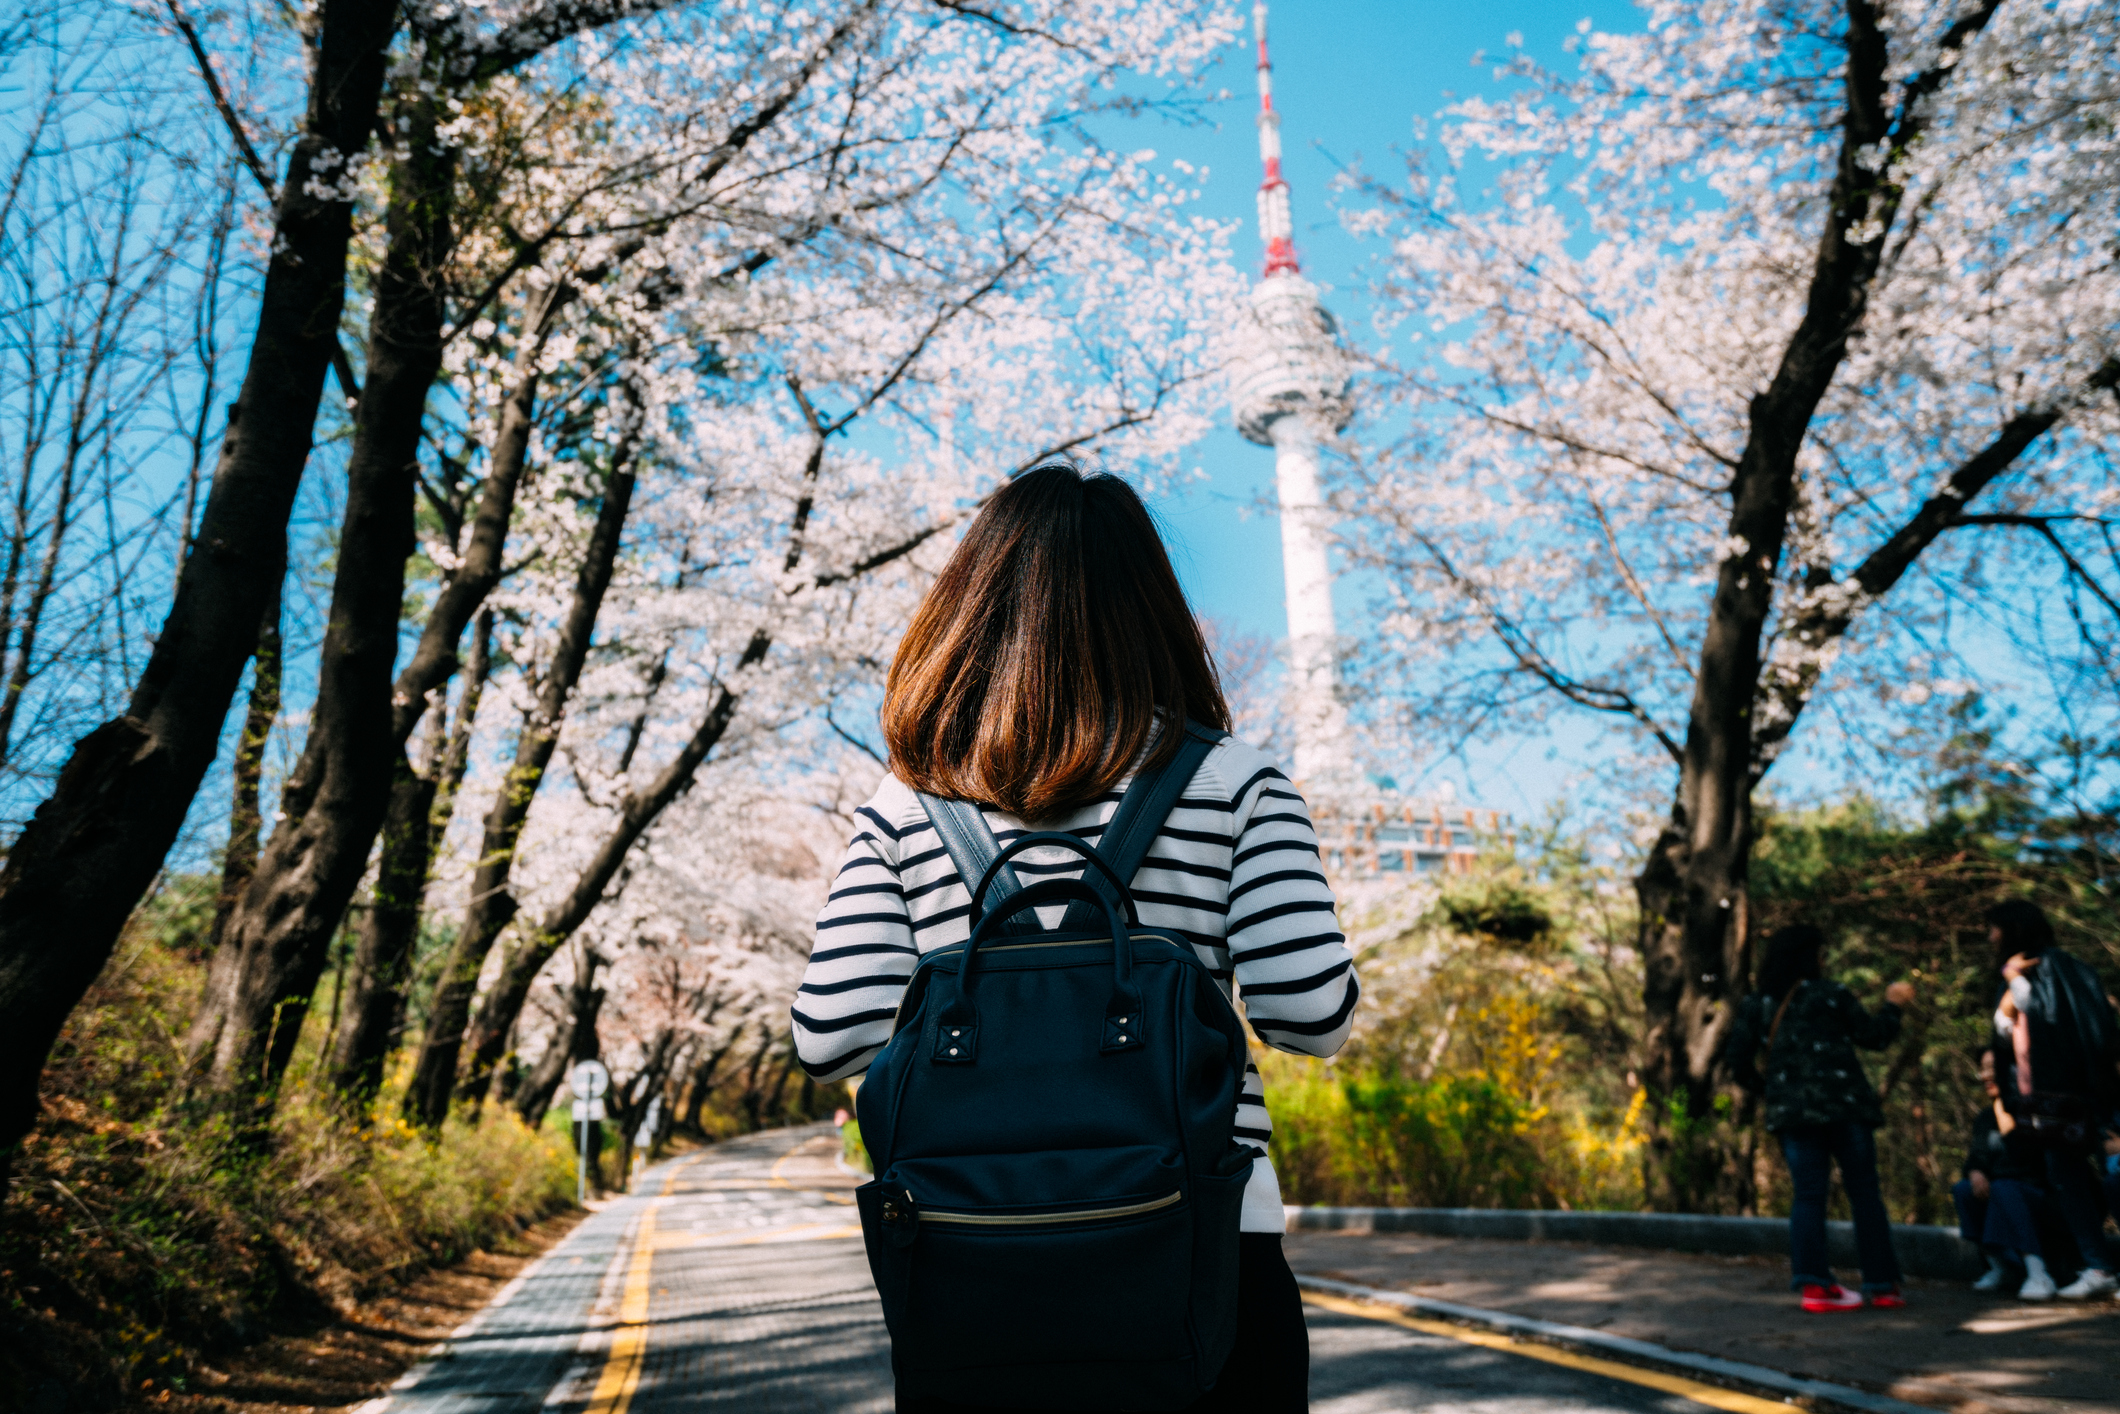 South Korea - girl with backpack, cherry blossoms Getty Image